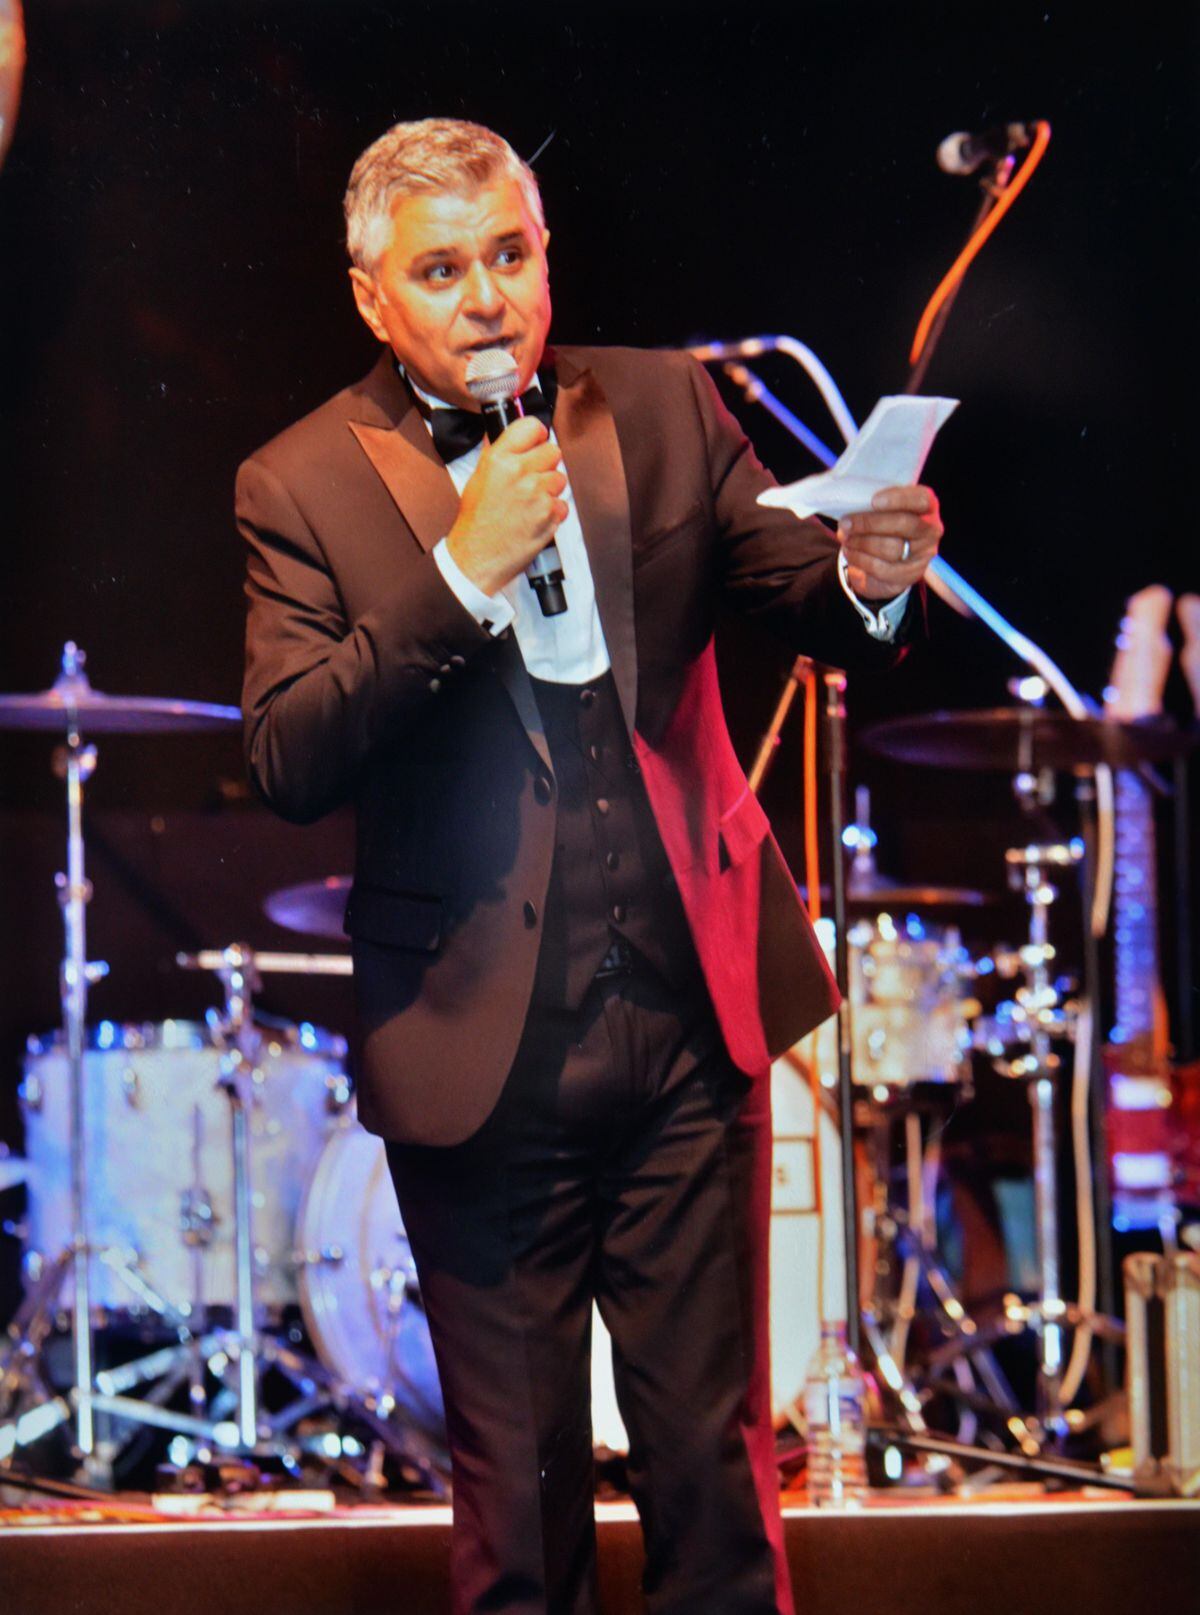 Suresh at one of his fundraising balls